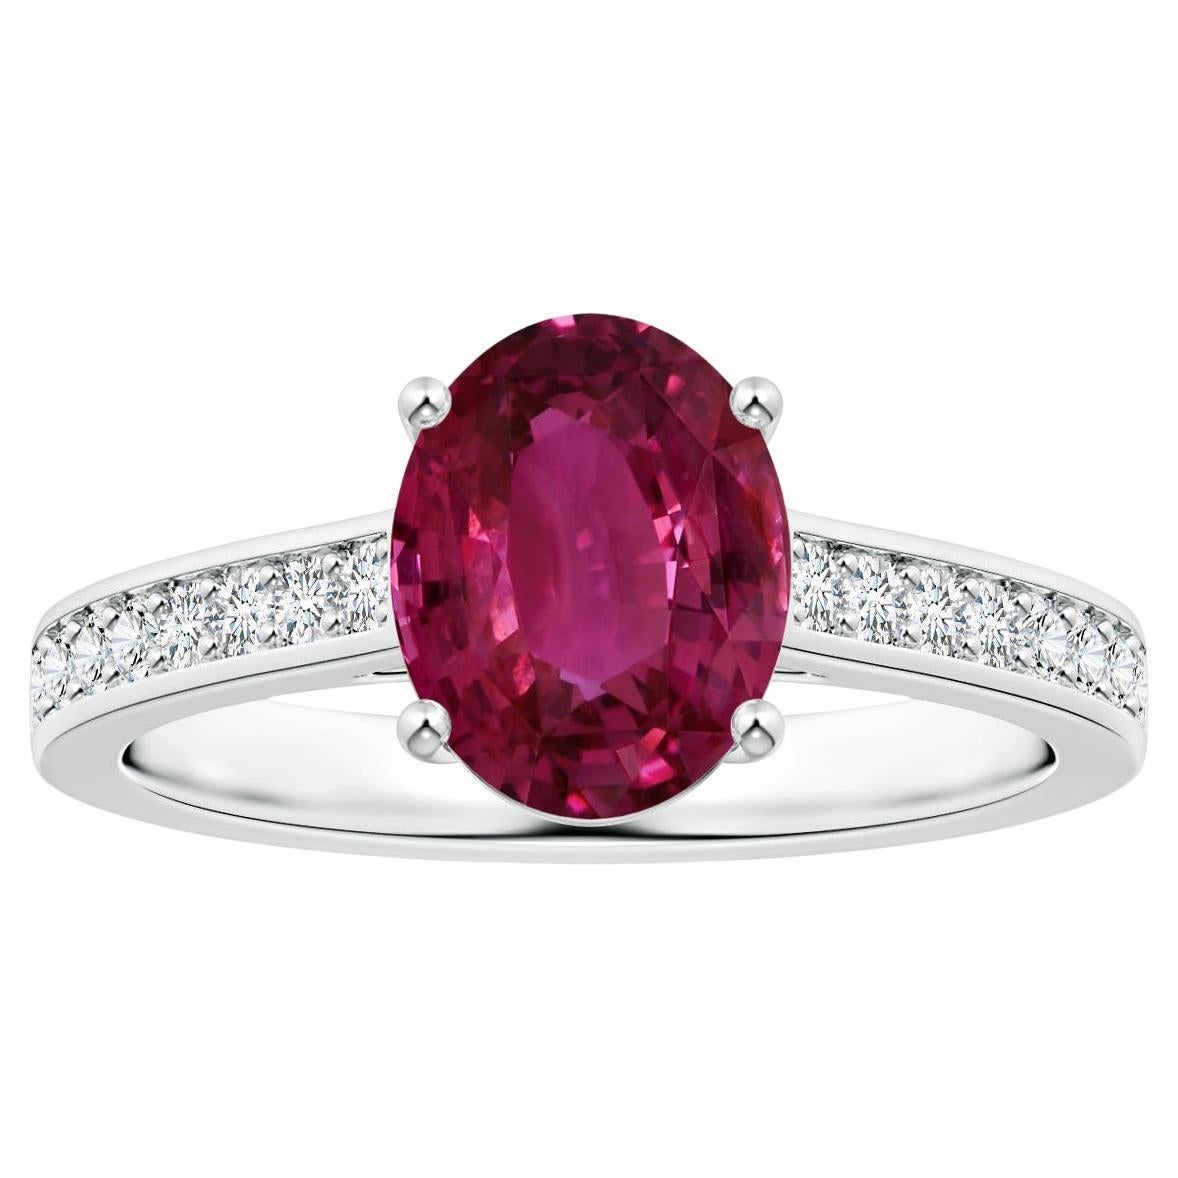 For Sale:  ANGARA Prong-Set GIA Certified Oval Pink Sapphire Ring in Platinum with Diamonds